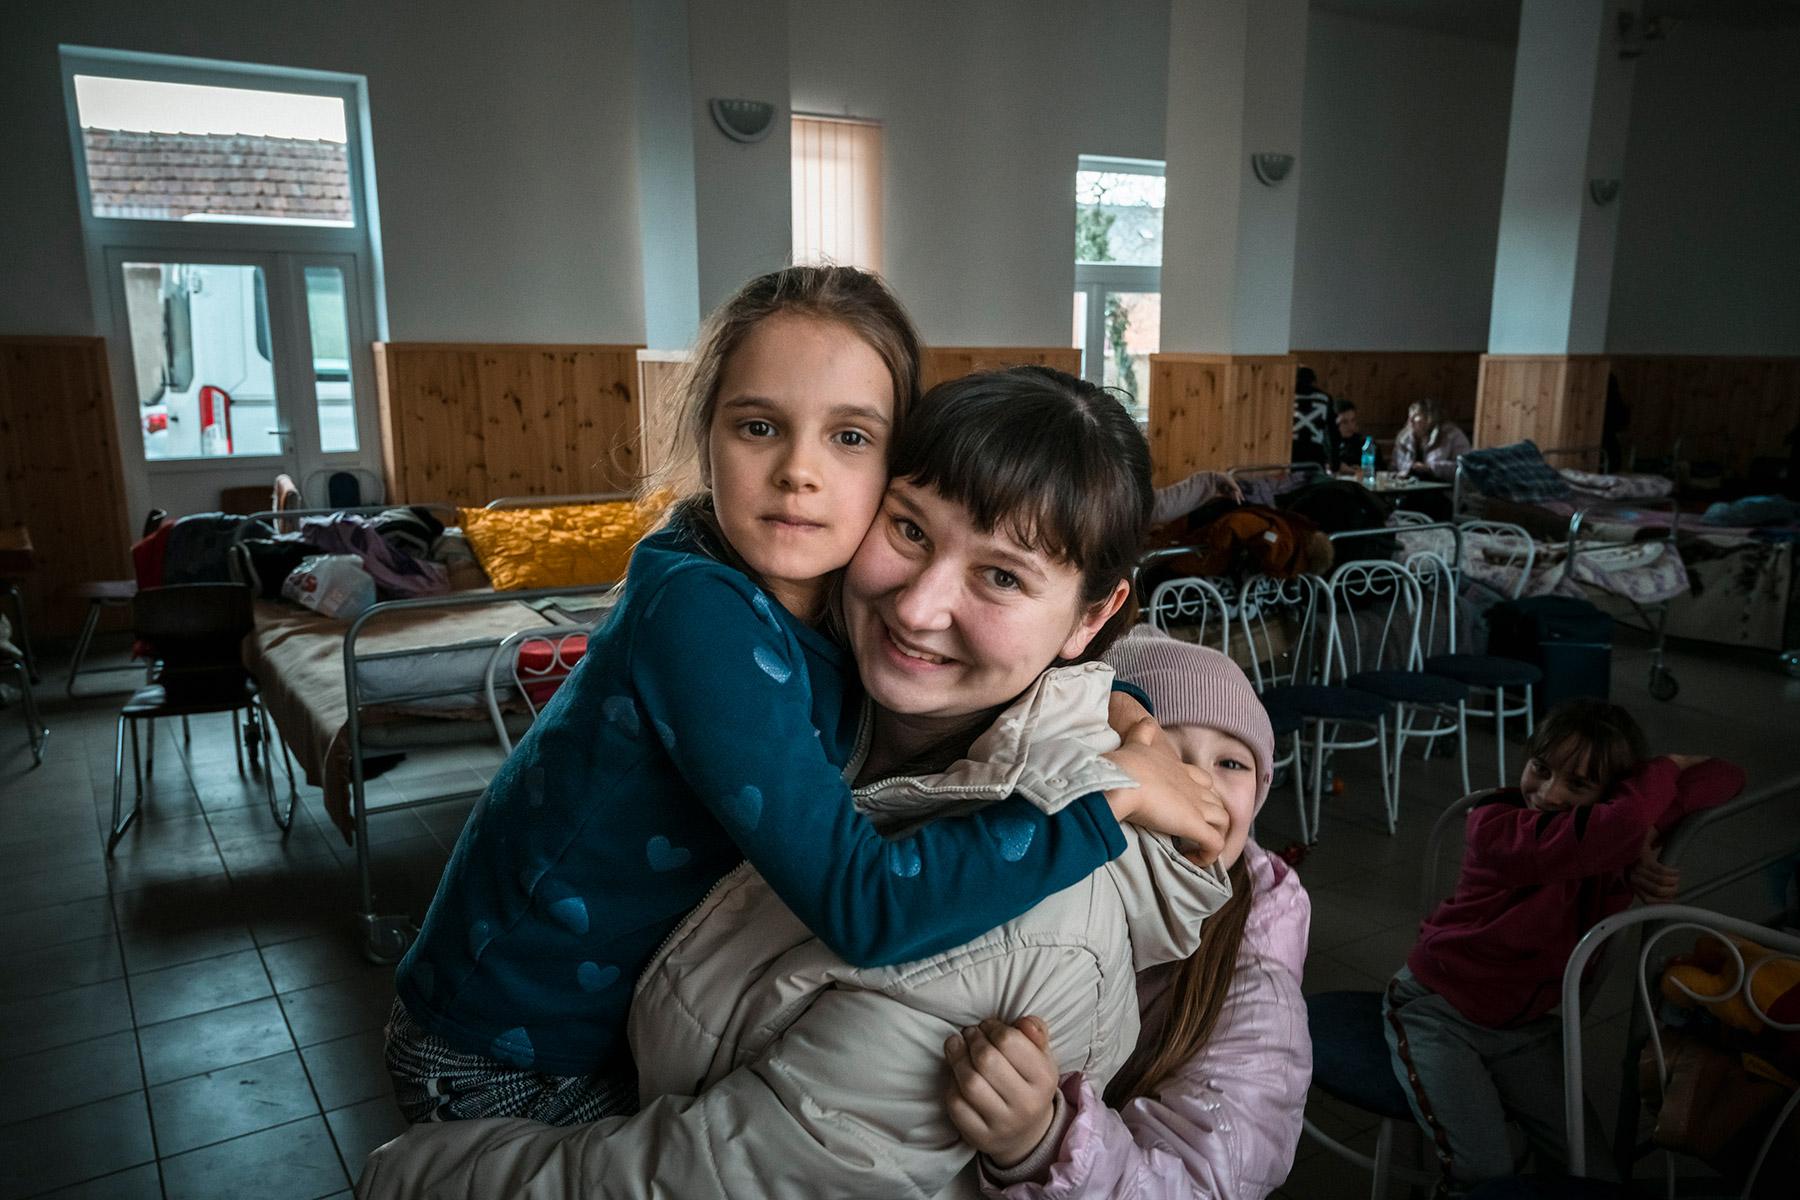 A Ukrainian refugee, Masha, with two of her children, at an aid station at the Ukrainian-Hungarian border on 2 March 2022. Masha, her husband and nine children fled from near the Crimean Peninsula and are receiving aid at a shelter where ACT Alliance member Hungarian Interchurch Aid is assisting Ukrainian refugees. Photo: FCA/Antti YrjÃ¶nen